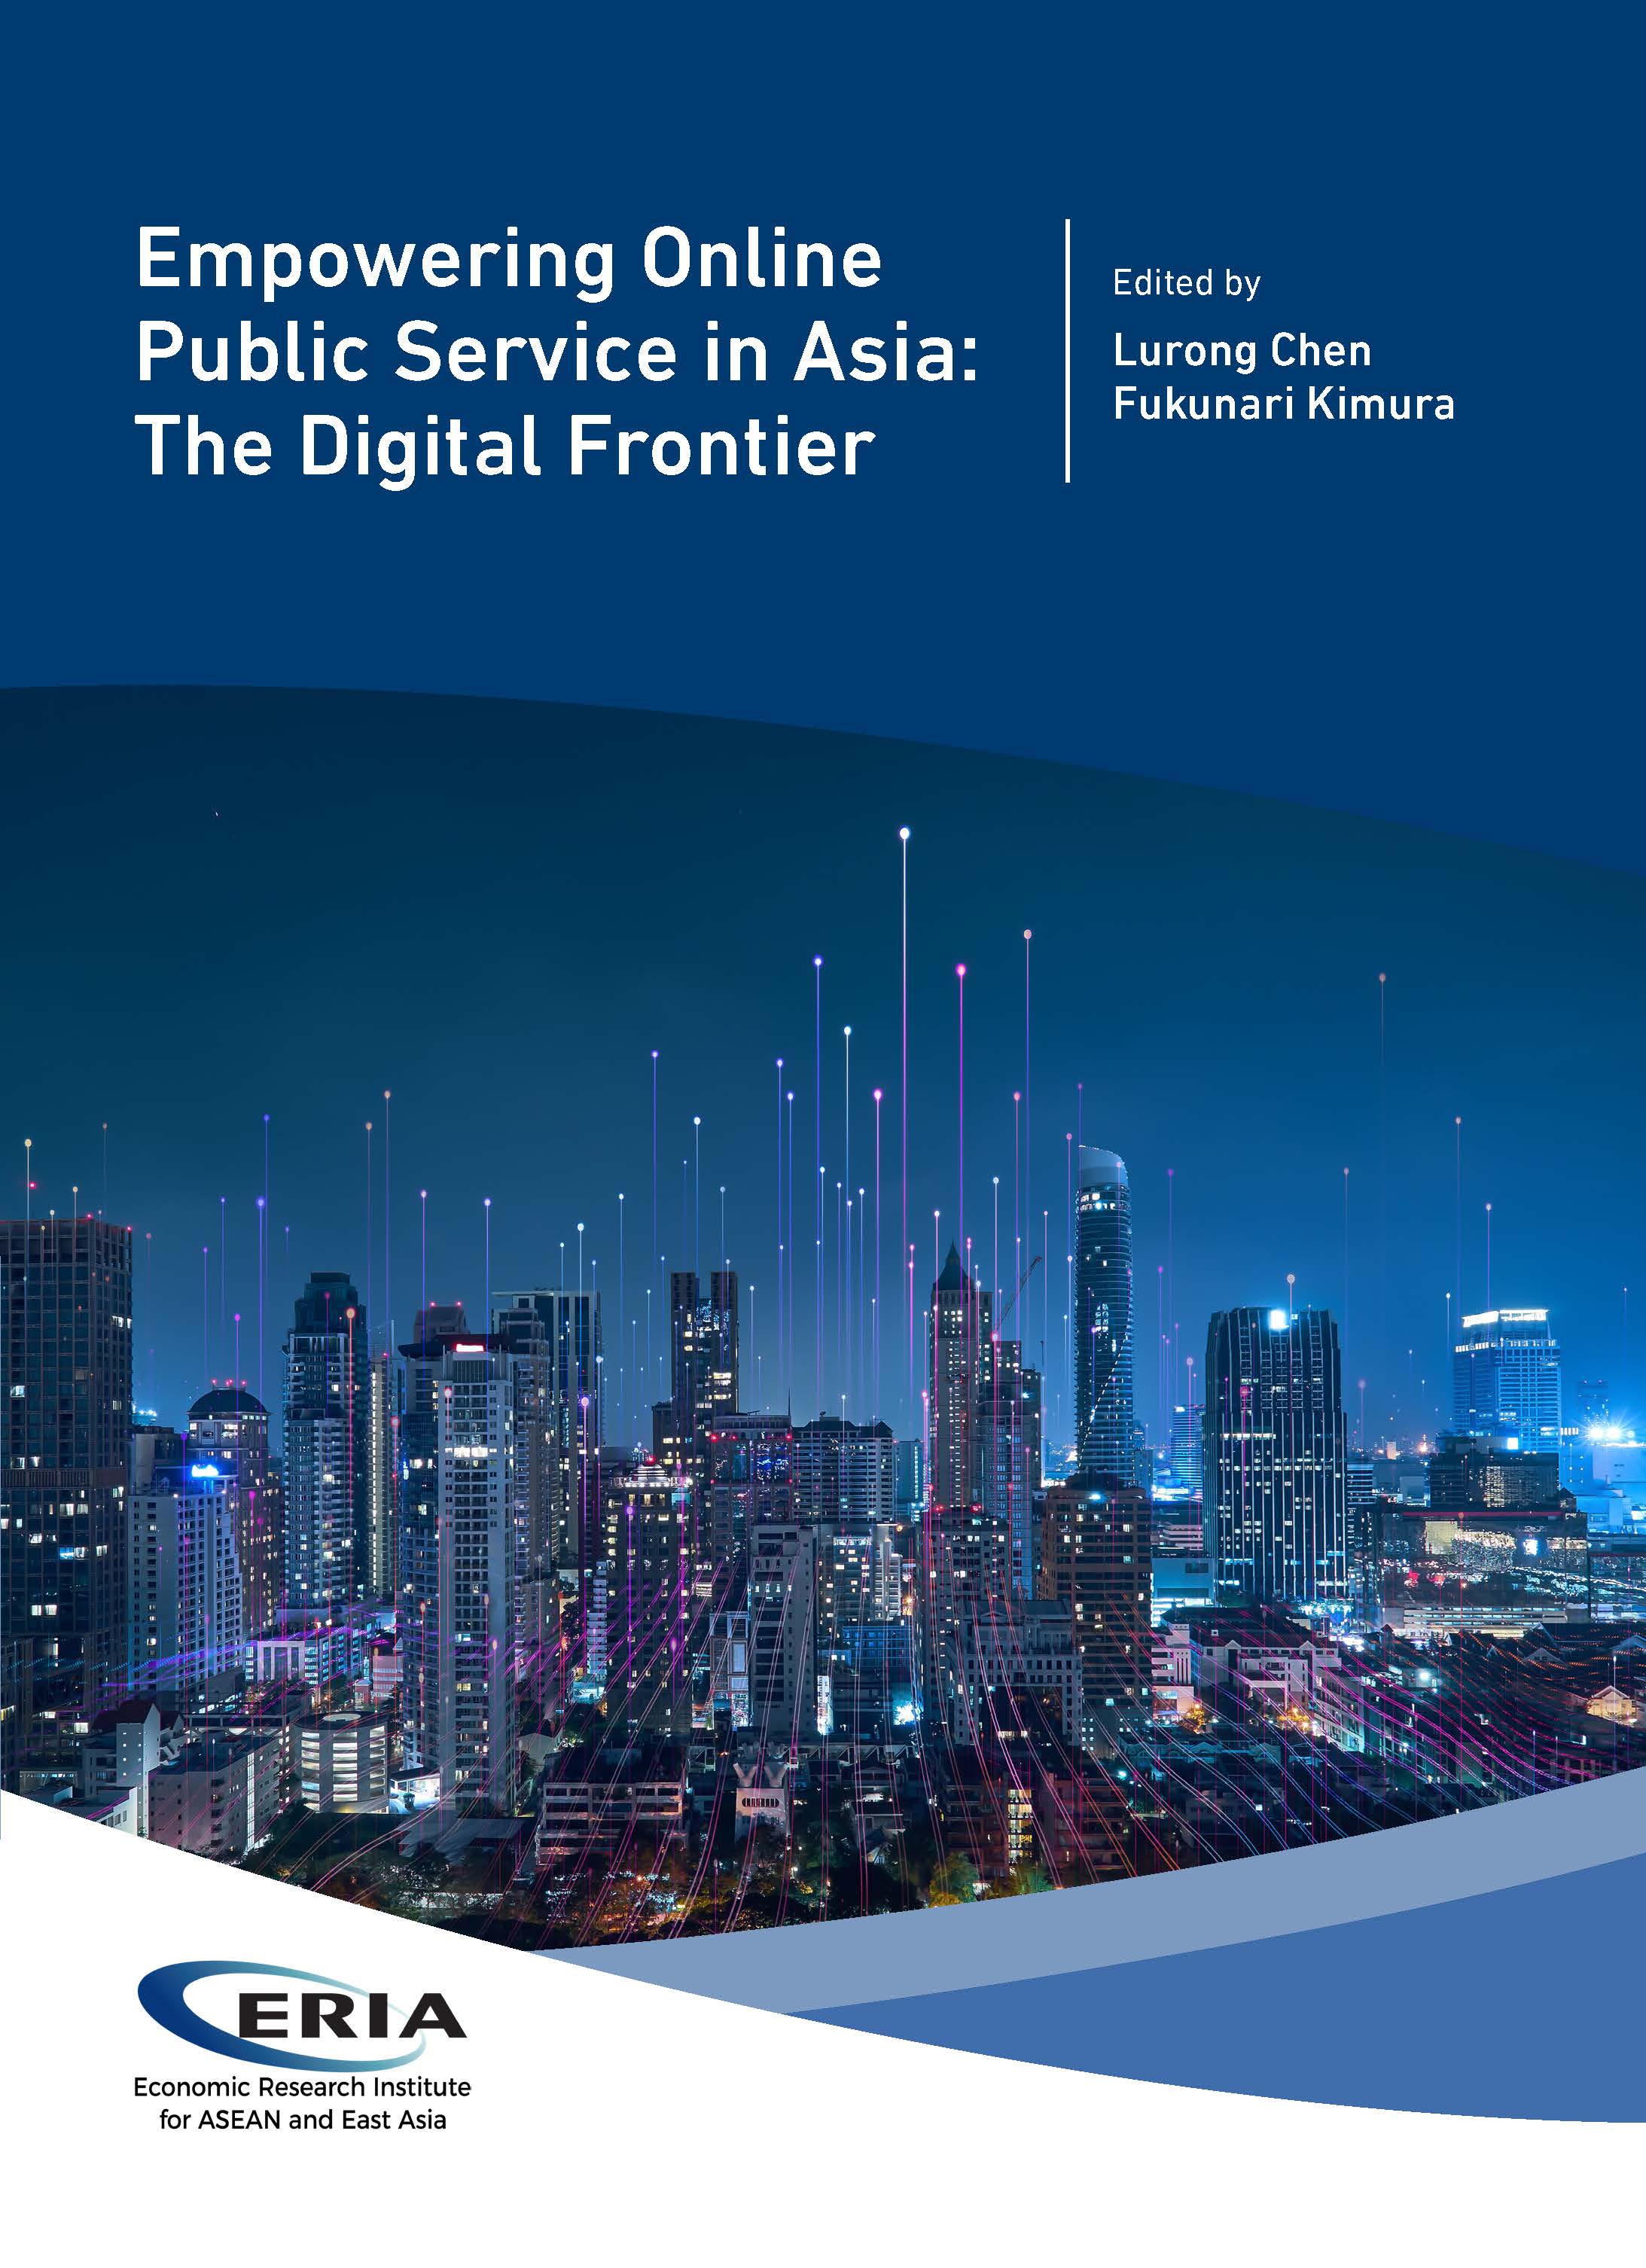 Empowering Online Public Service in Asia: The Digital Frontier